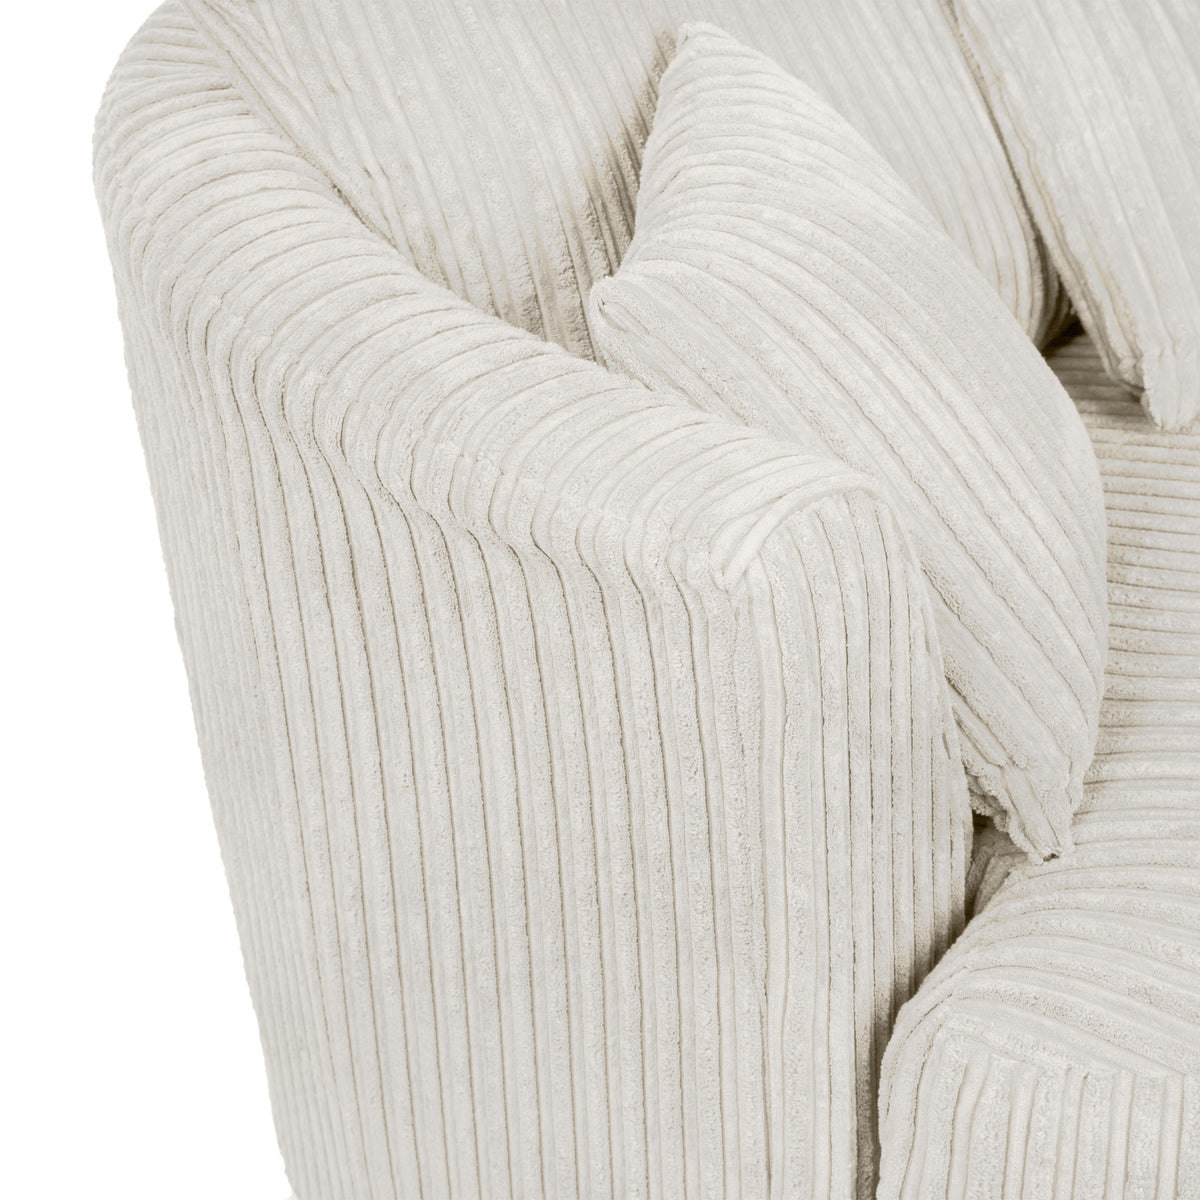 Bletchley Cream Jumbo Cord Swivel Chair from Roseland Furniture